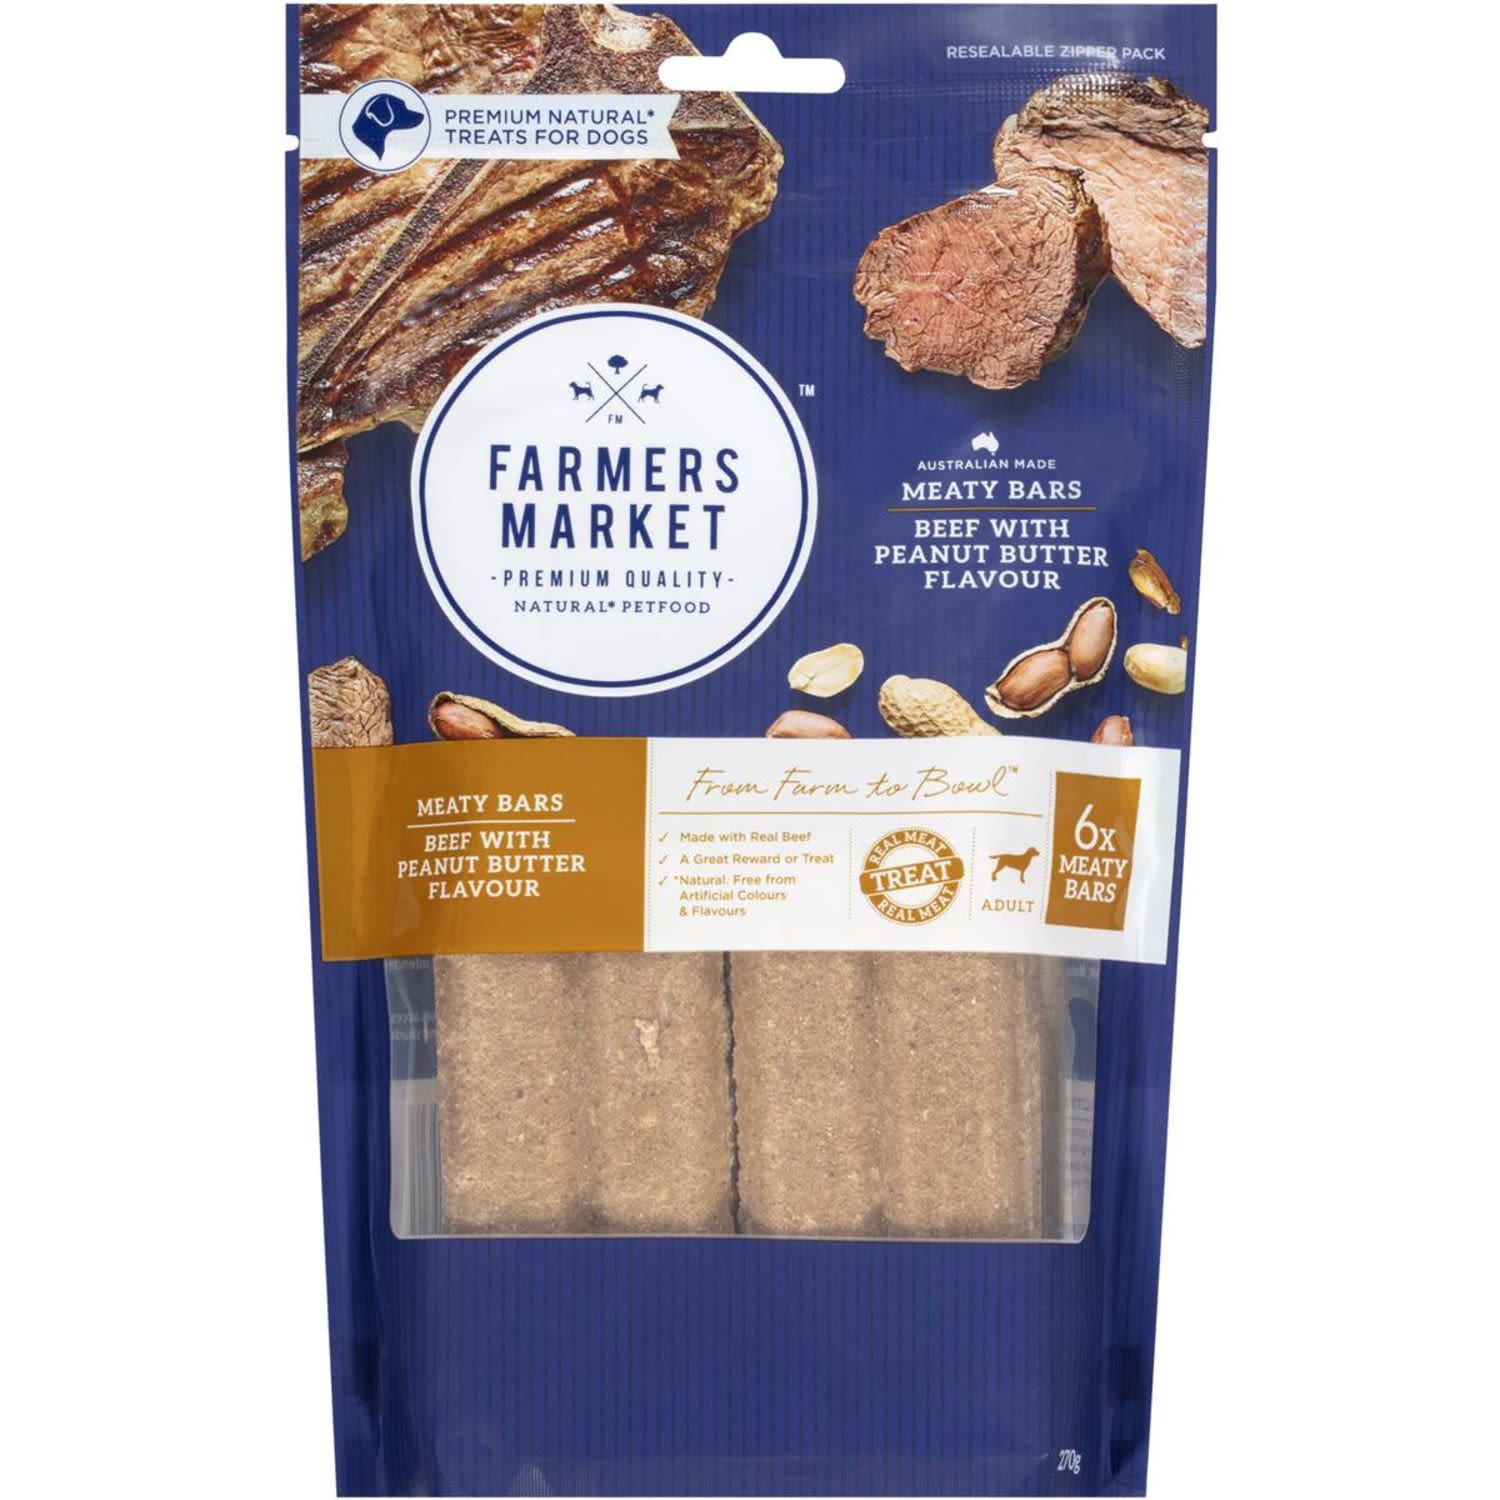 Farmers Market Meaty Bars Beef With Peanut Butter Flavour Dog Treats, 270 Gram